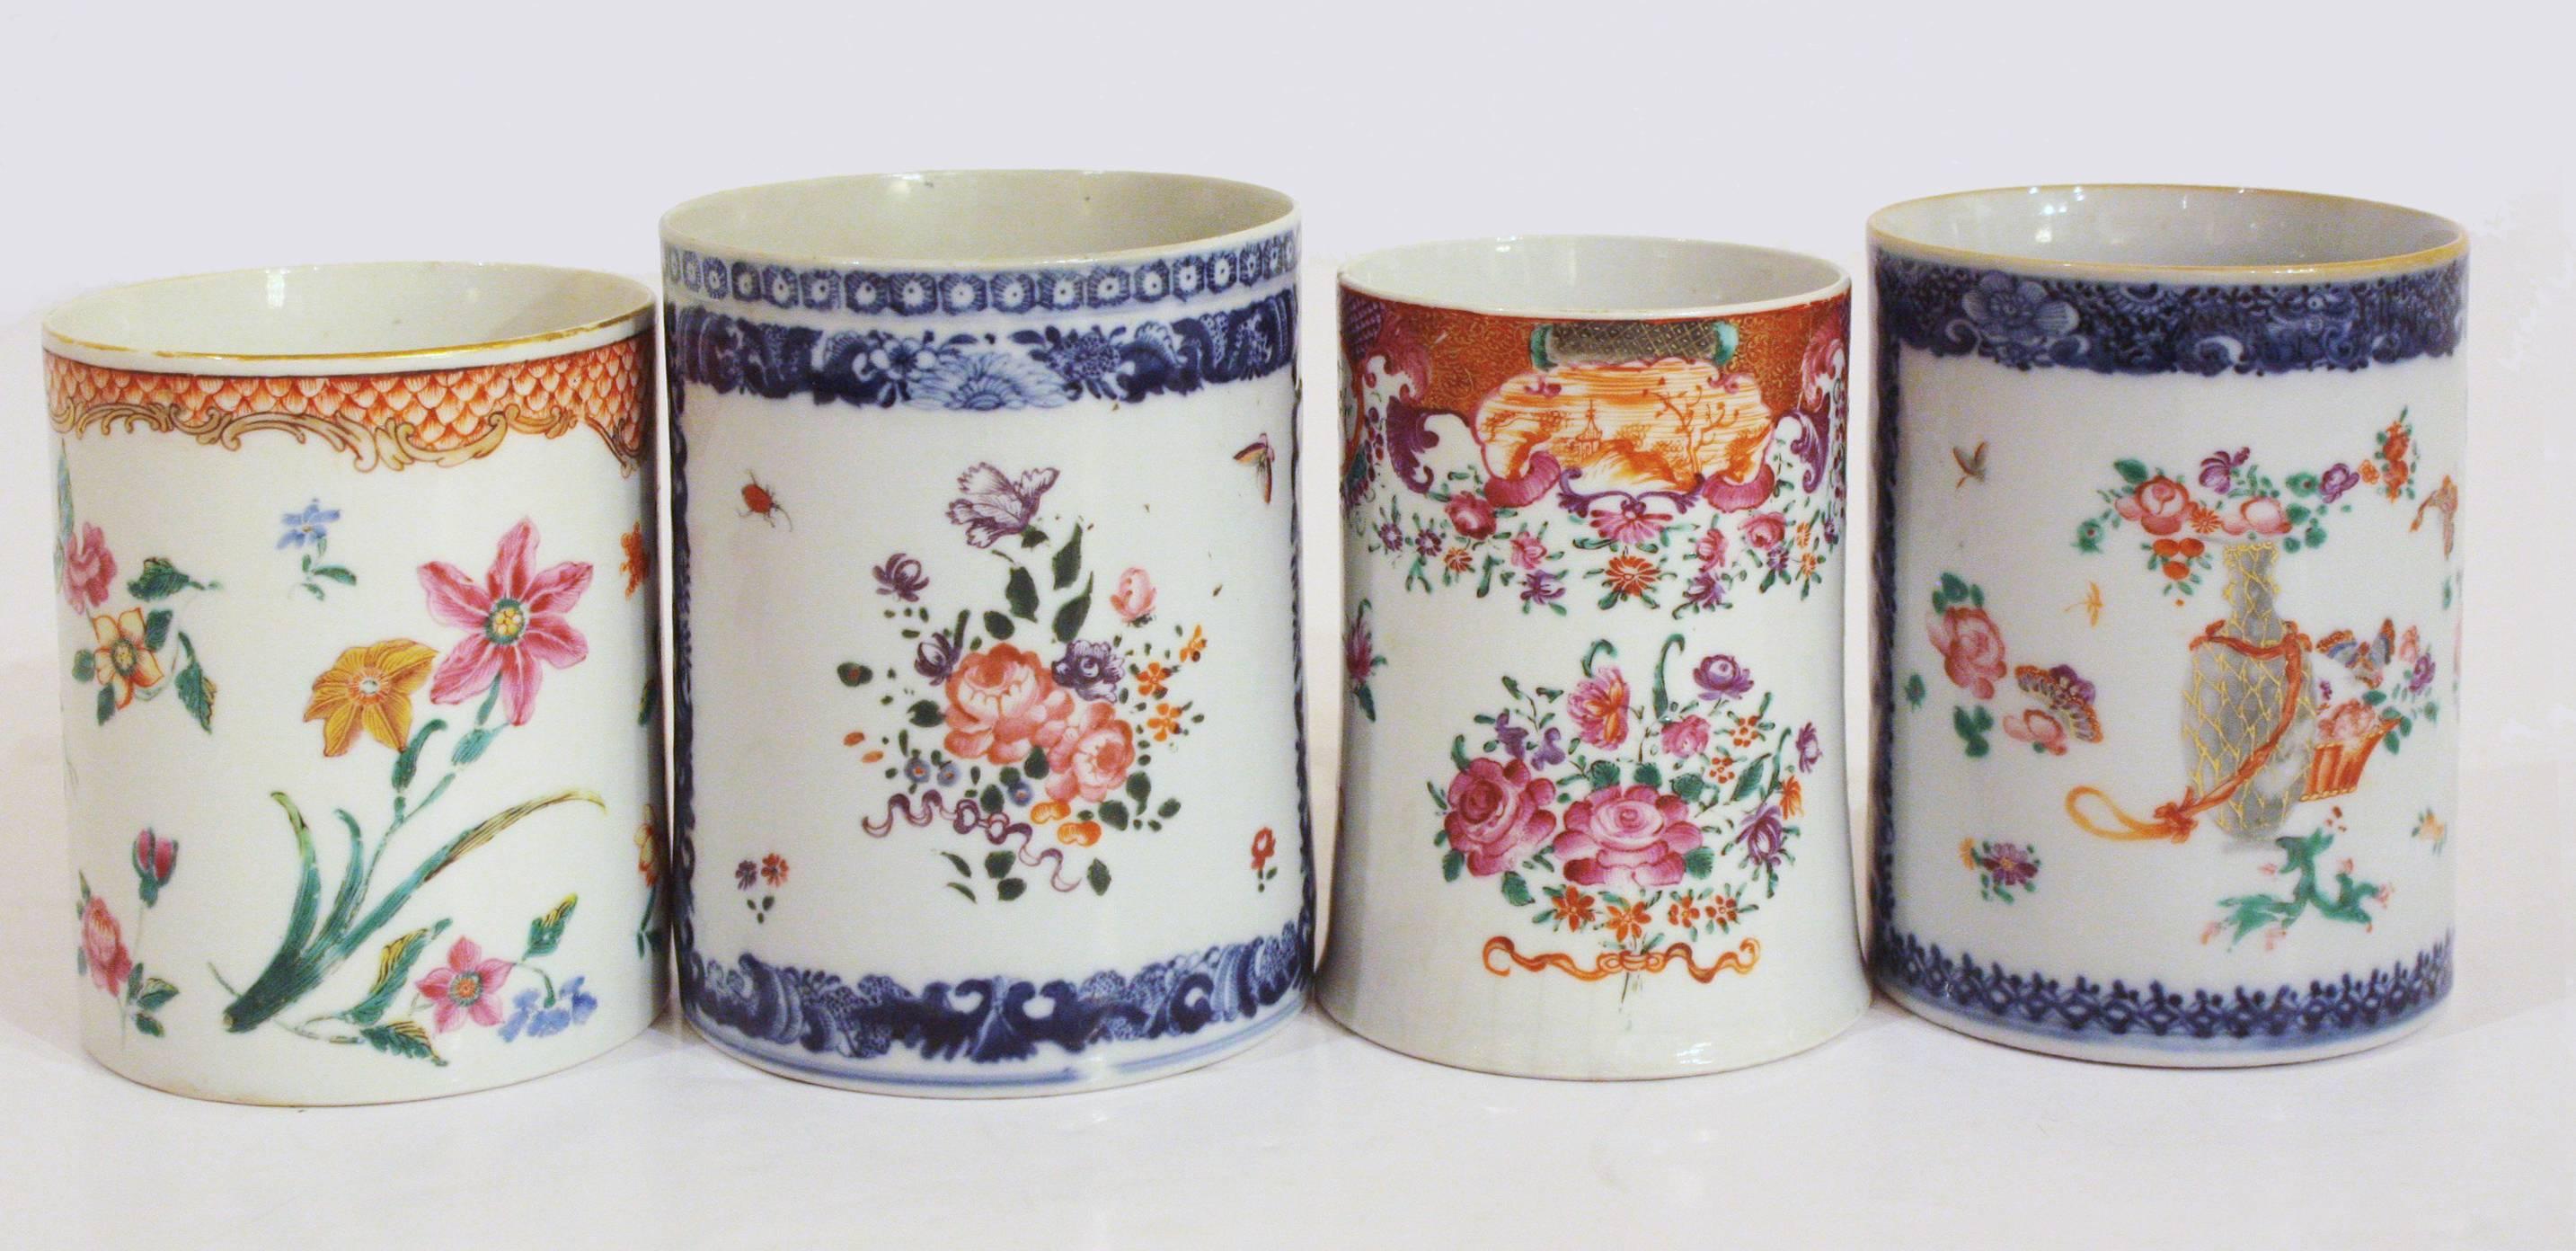 Mugs are for sale as a set of three or individually
Left: Sold
Top: Chinese Export Canton blue white polychrome tankard. One large panel with vase and flowers, four small panels flanking handle. Measure: 3.75